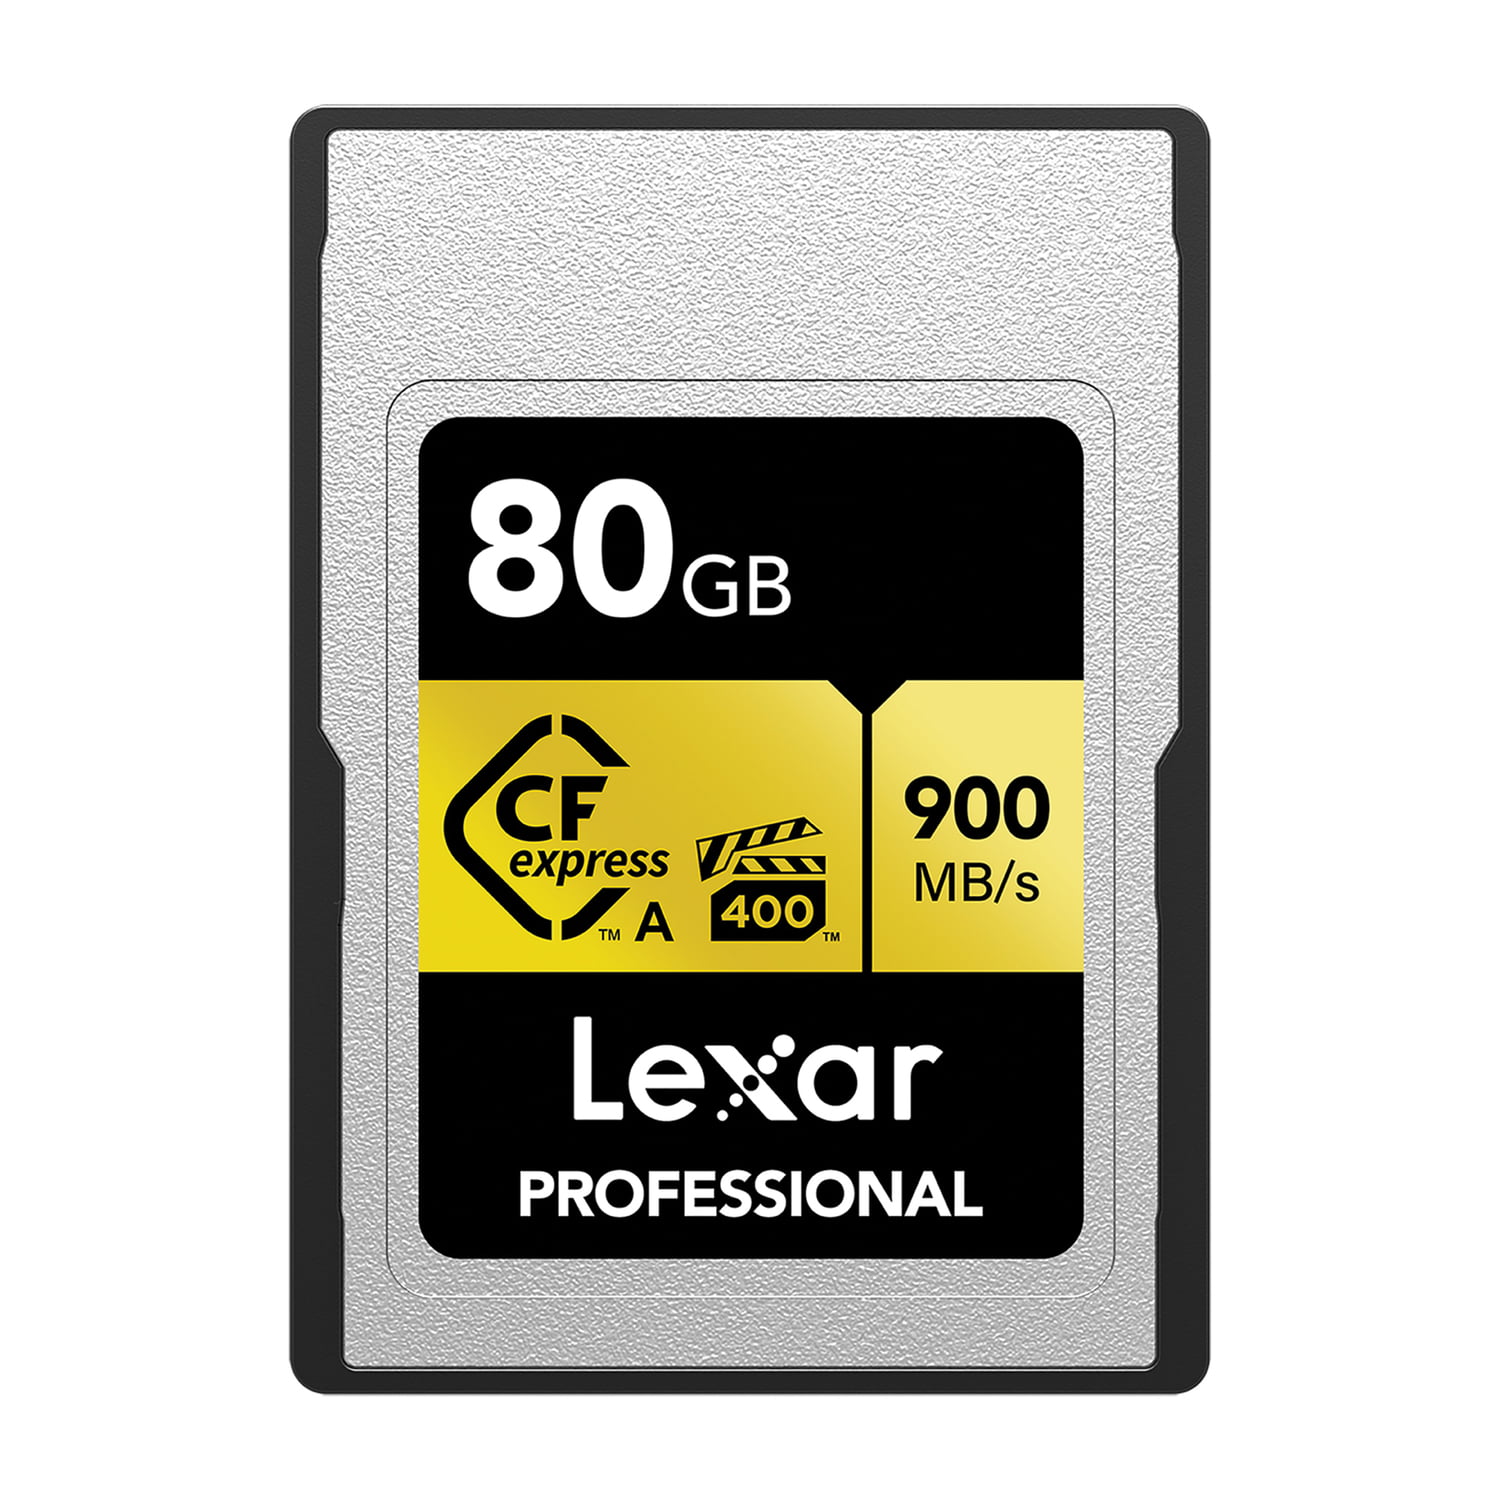 Picture of Lexar LCAGOLD080G-RNENG 80GB Professional CFexpress Type A Card - Gold Series